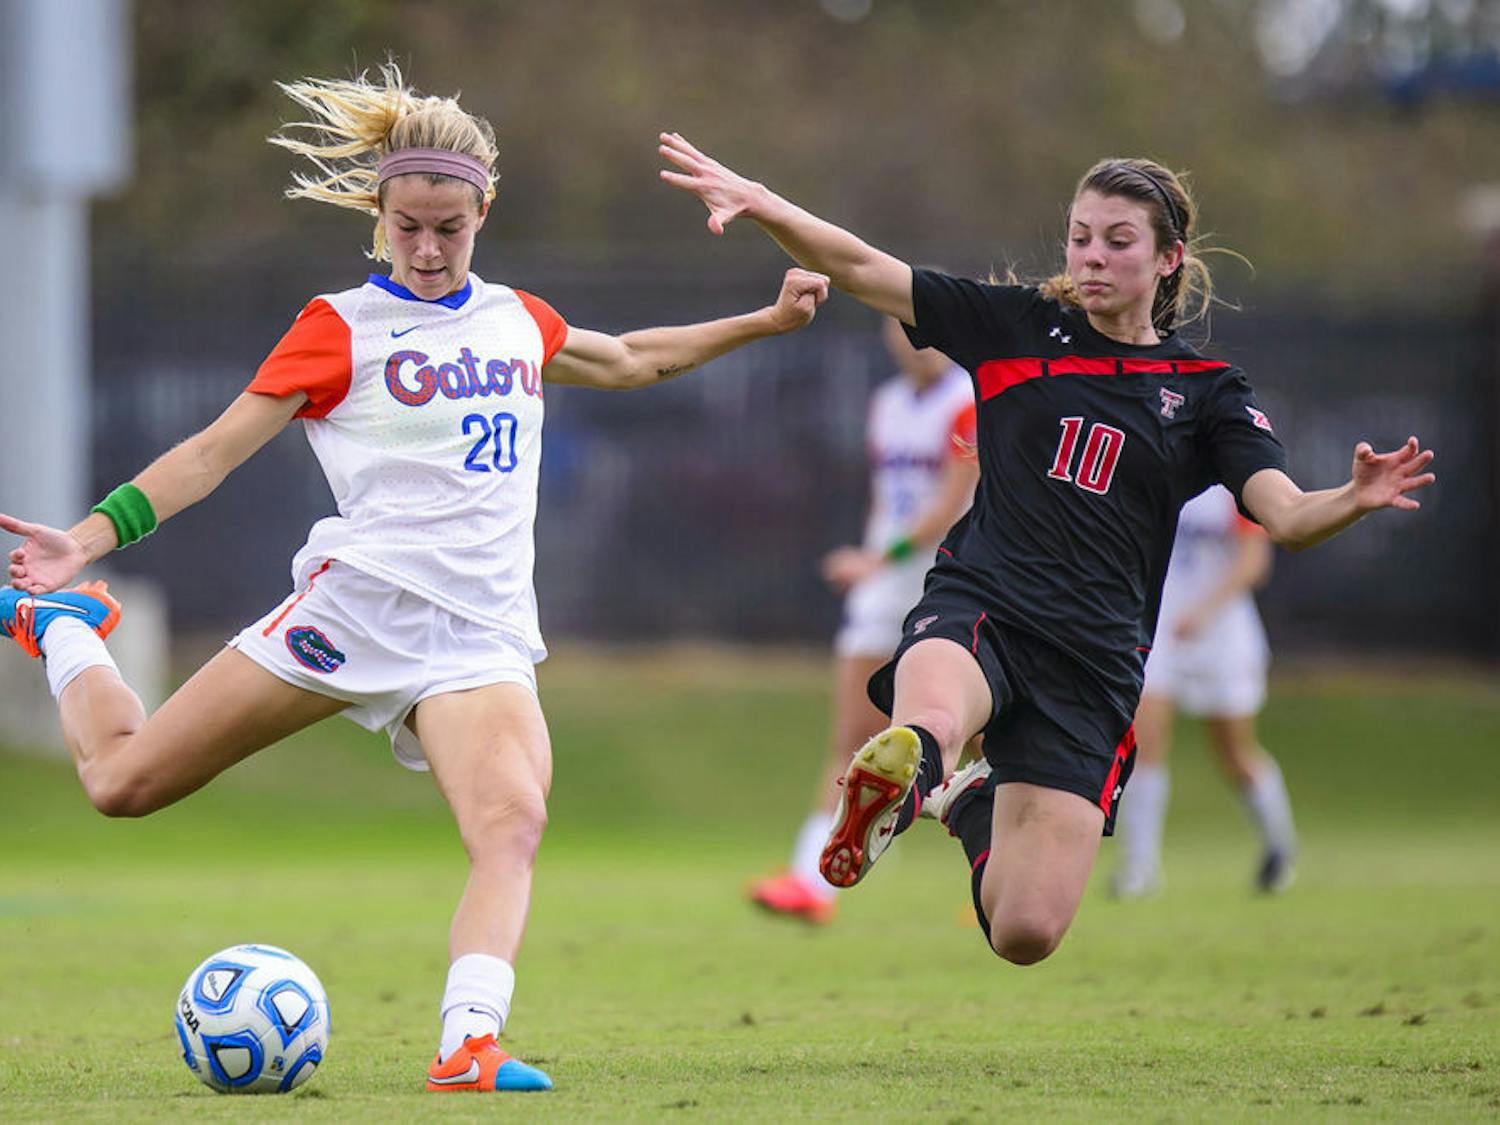 Christen Westphal kicks the ball during Florida's 3-2 win against Texas Tech during the third round of the NCAA Tournament on Sunday at Donald R. Dizney Stadium.